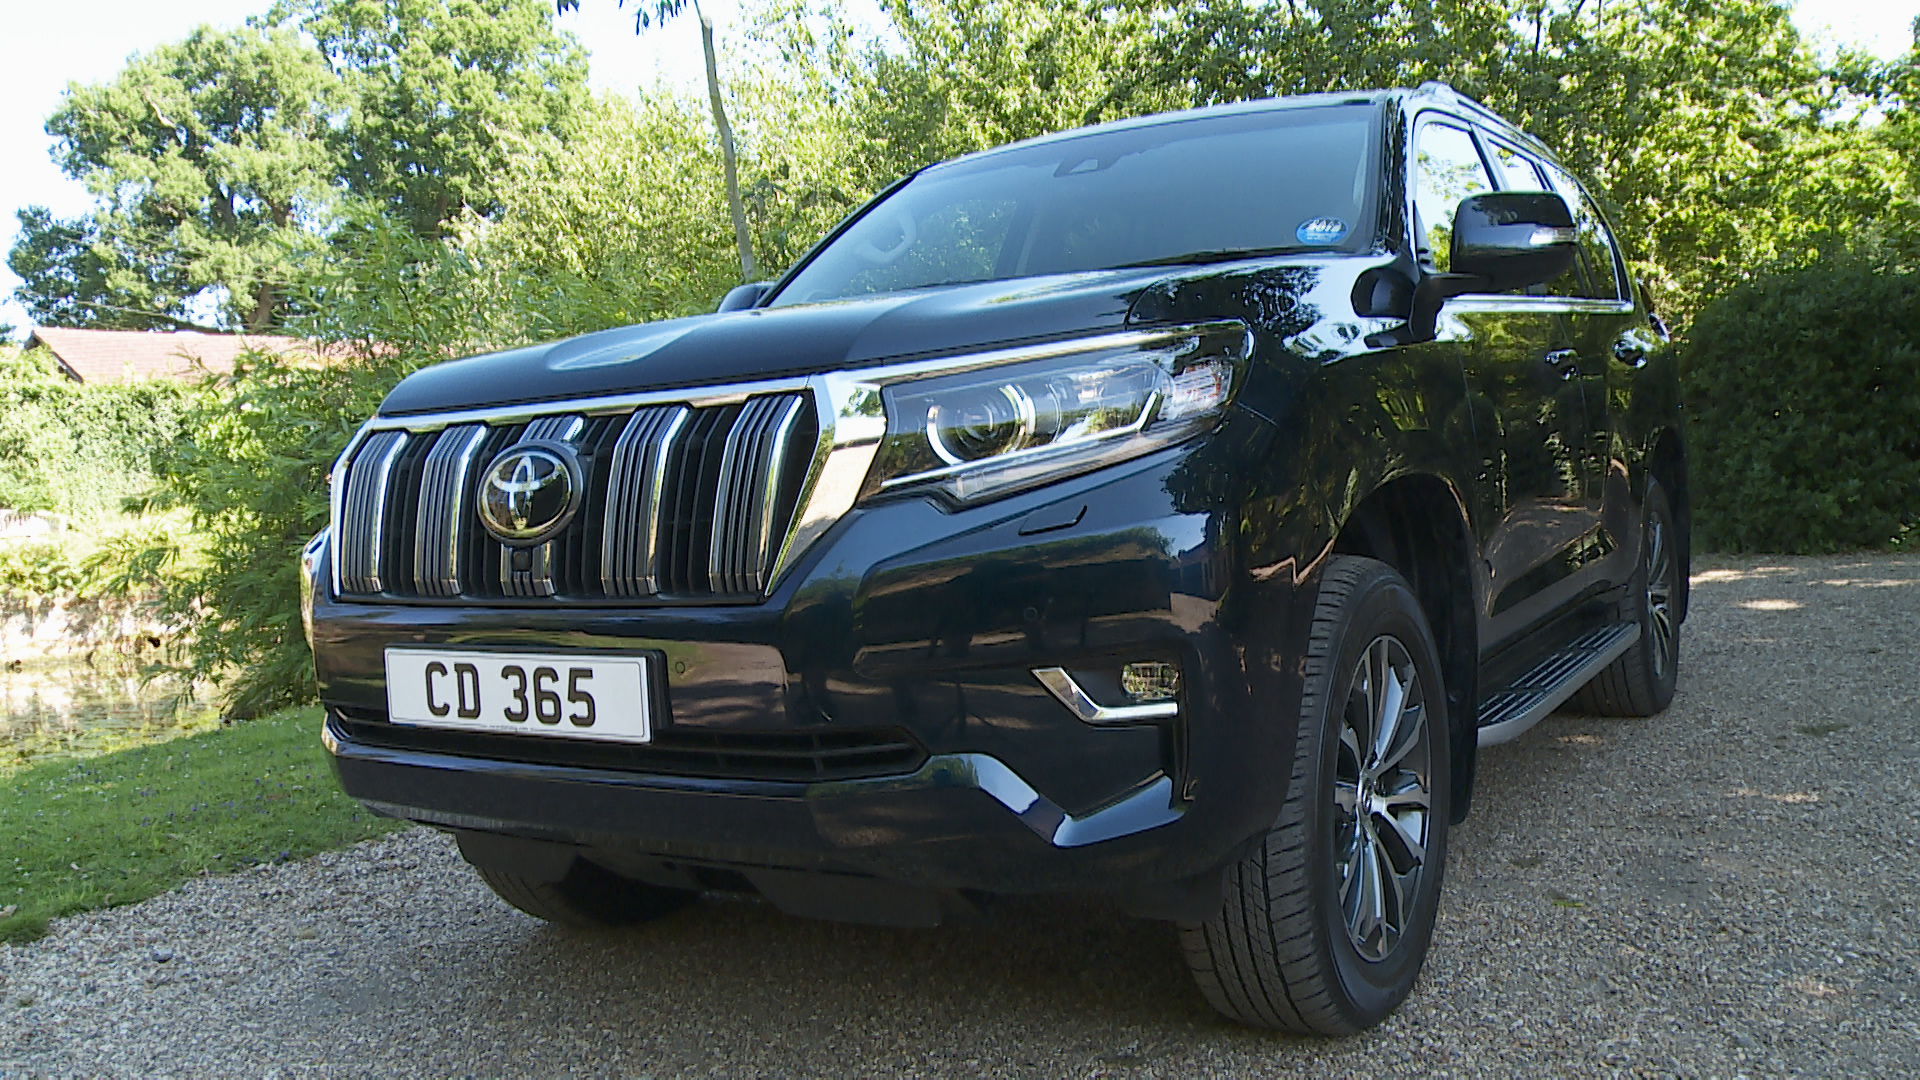 TOYOTA LAND CRUISER SWB DIESEL 2.8D 204 Active Commercial Auto